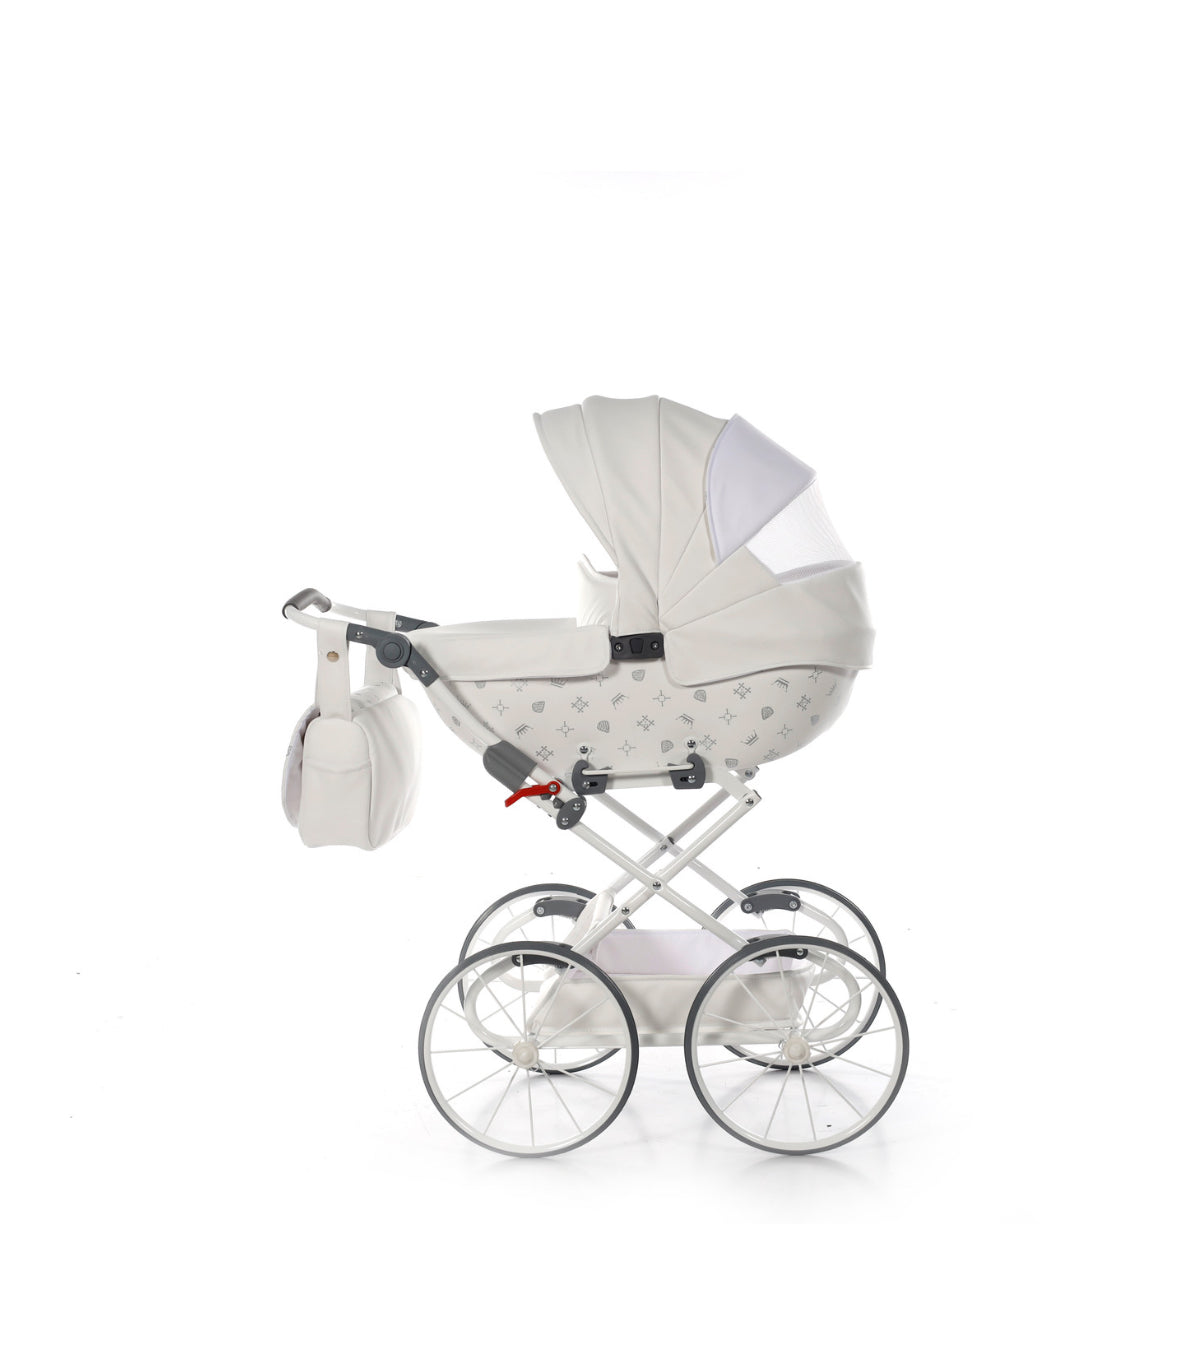 IMPERIAL CLASSIC WHITE DOLL'S PRAM (1-2 days delivery)